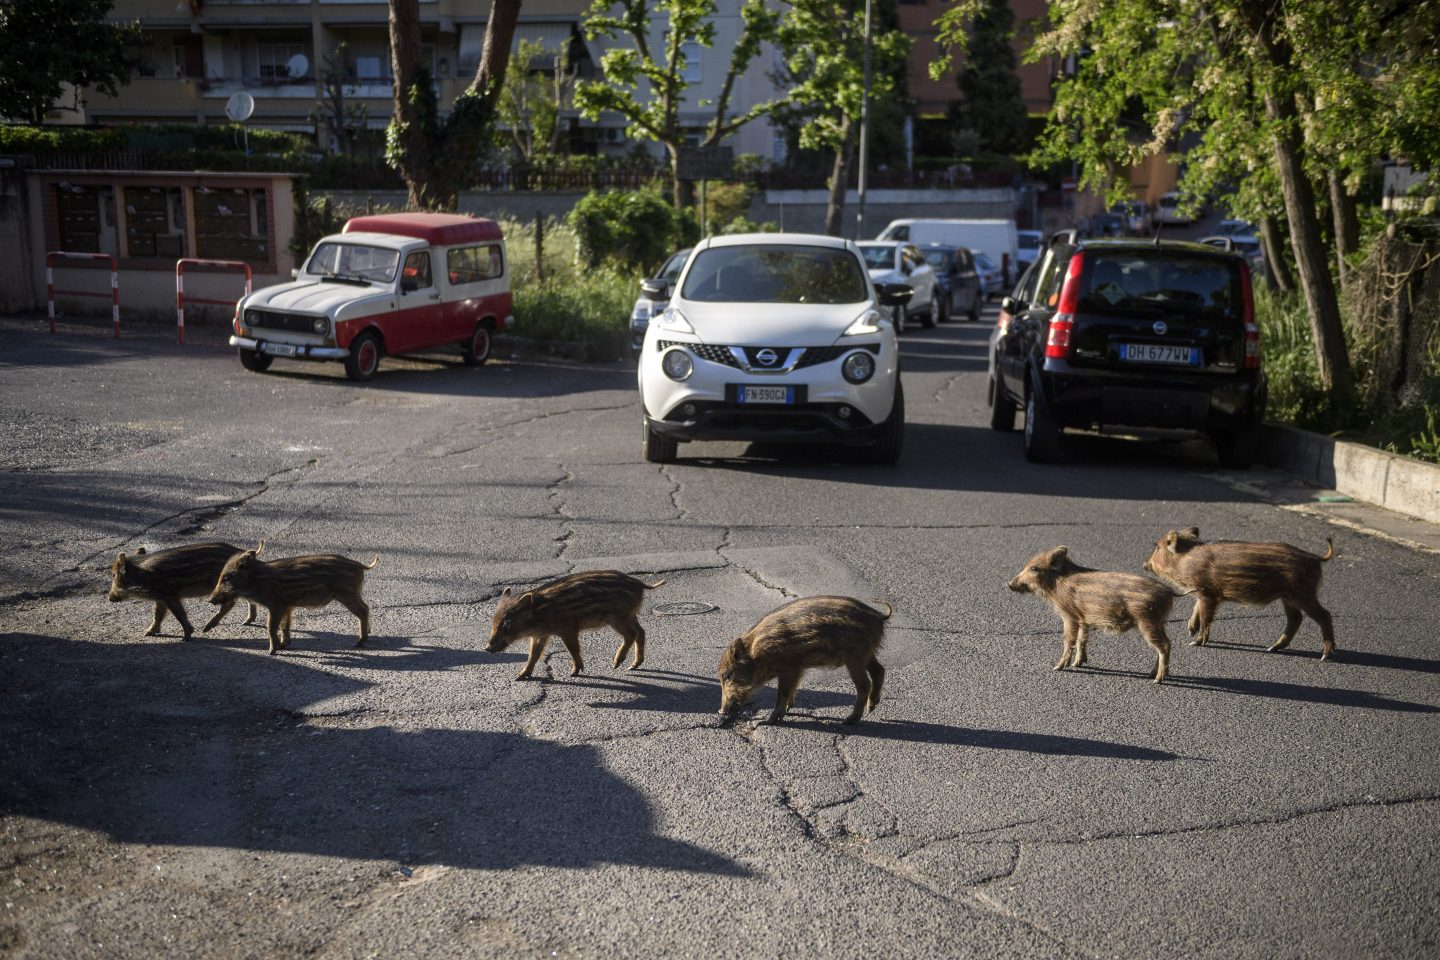 Italy sends soldiers to stop wild boars menacing its $8.8 billion pork industry